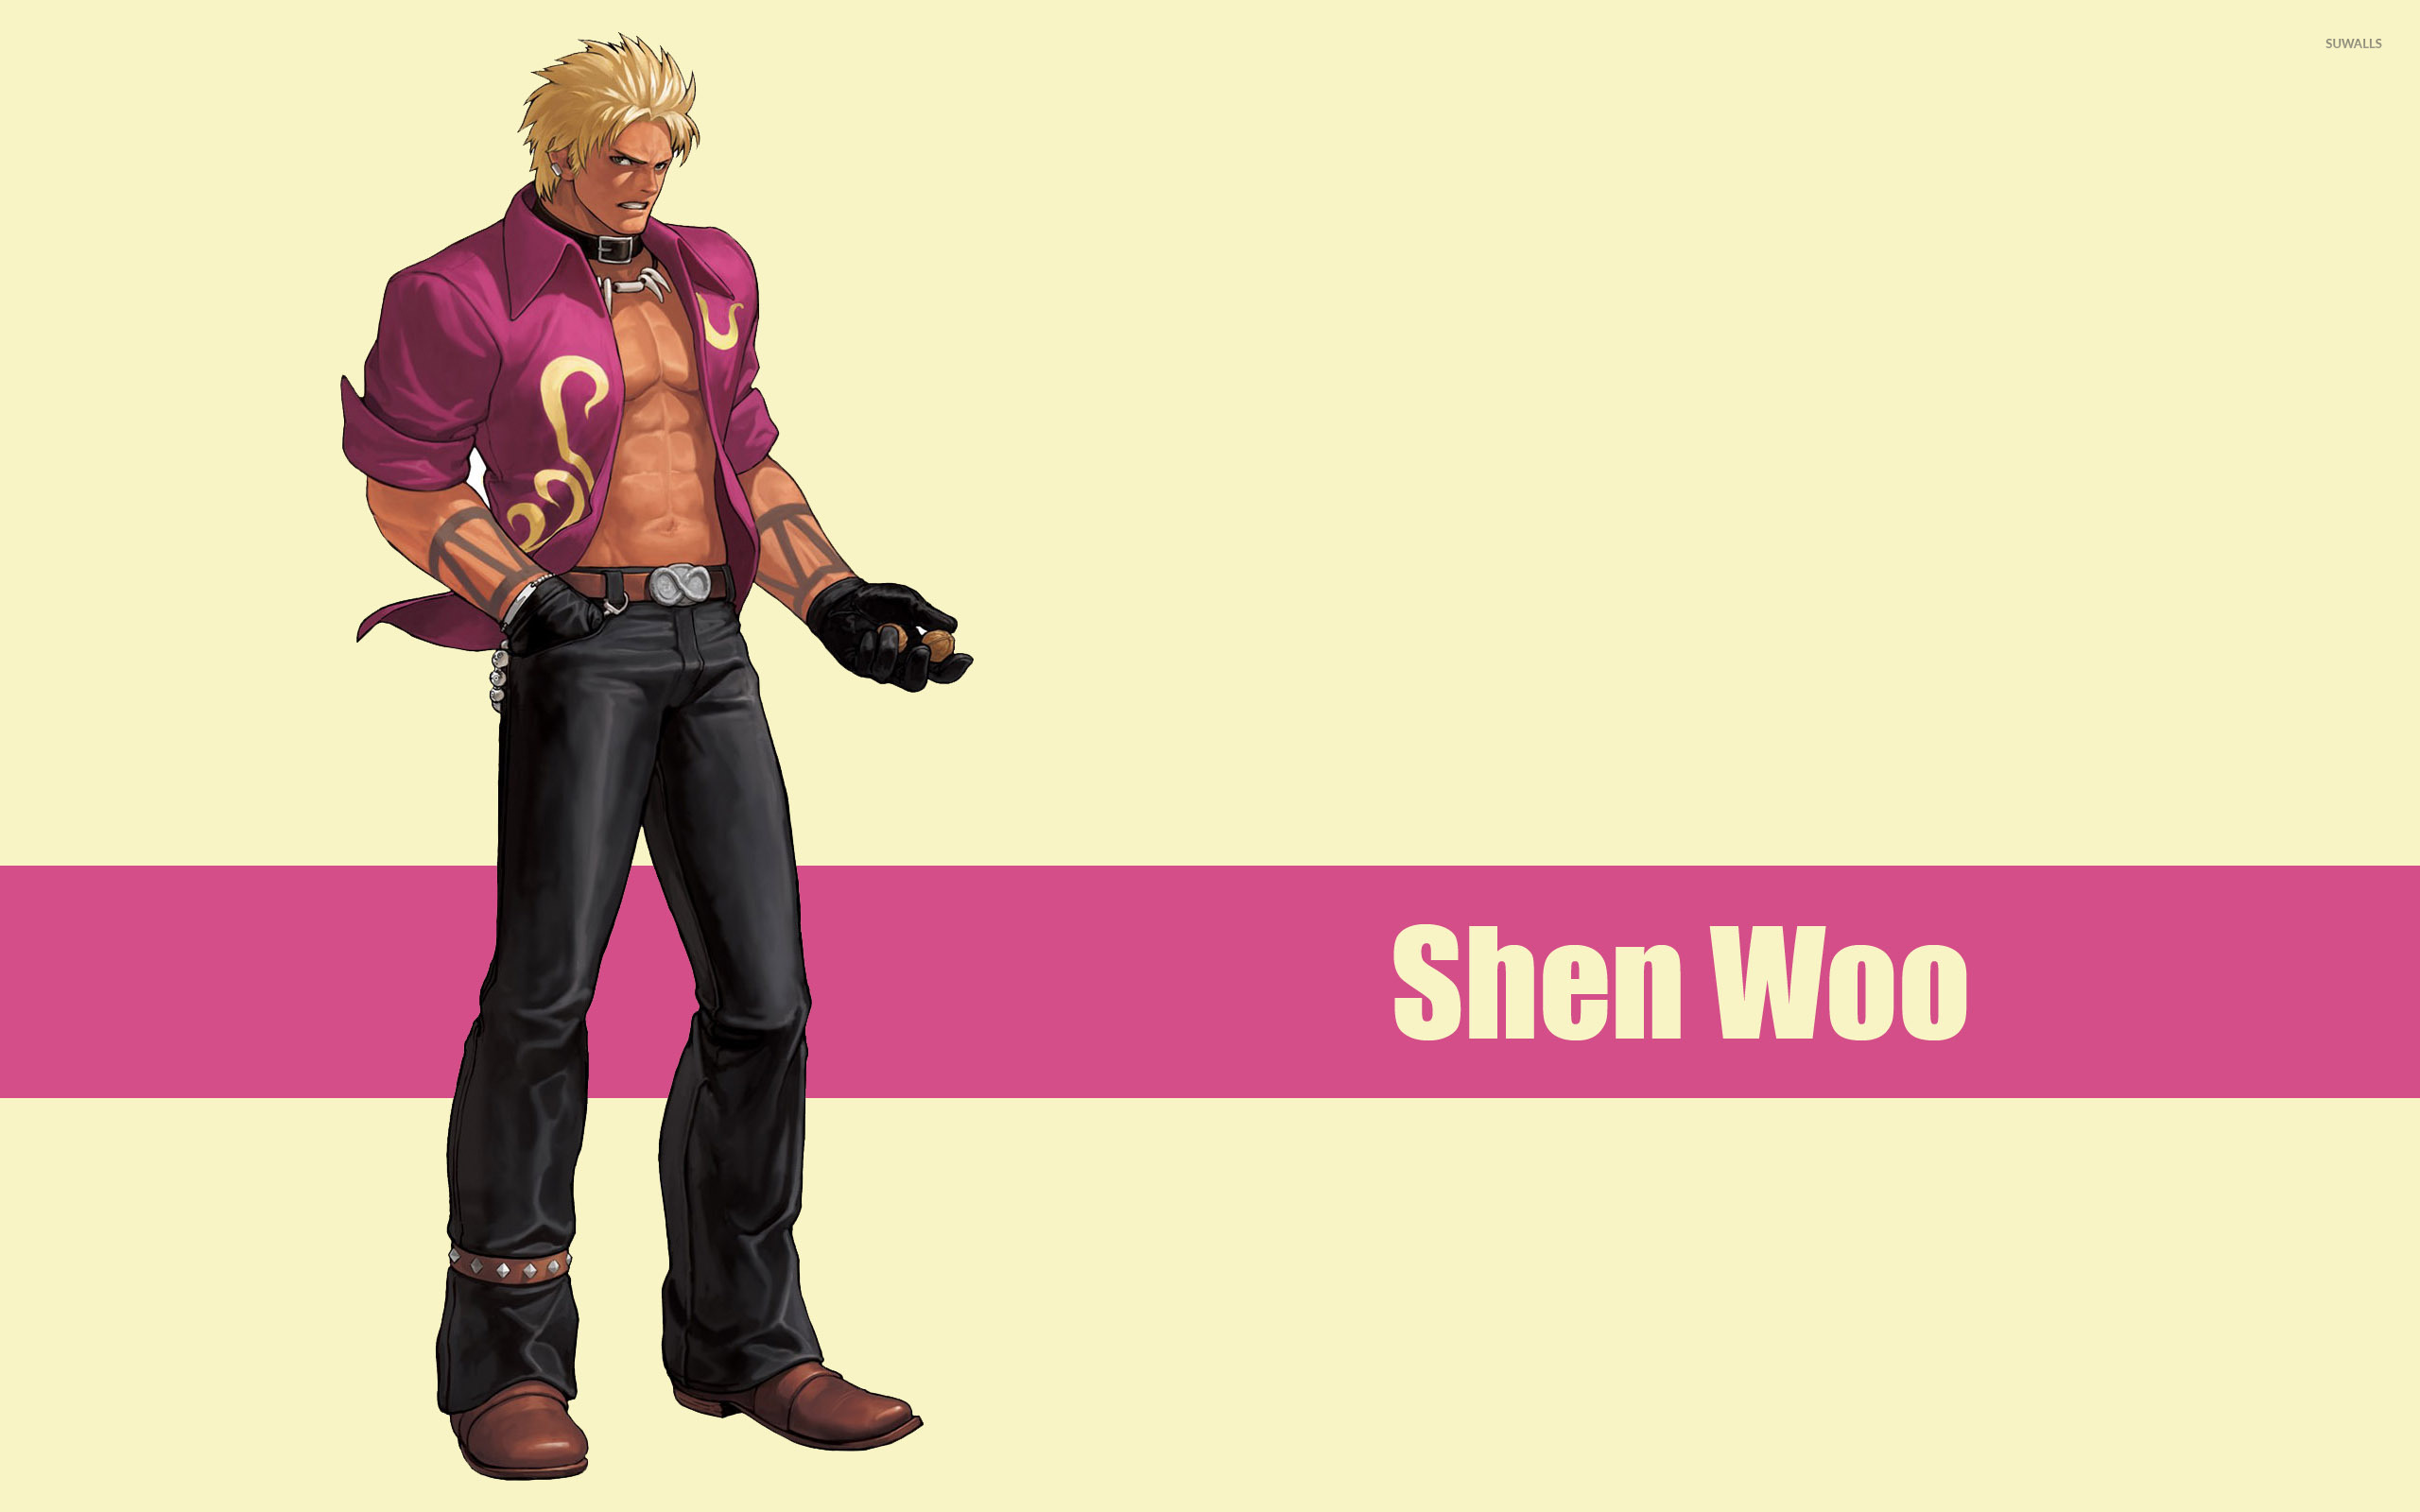 Shen Woo - The King of Fighters wallpaper - Game wallpapers - #30790